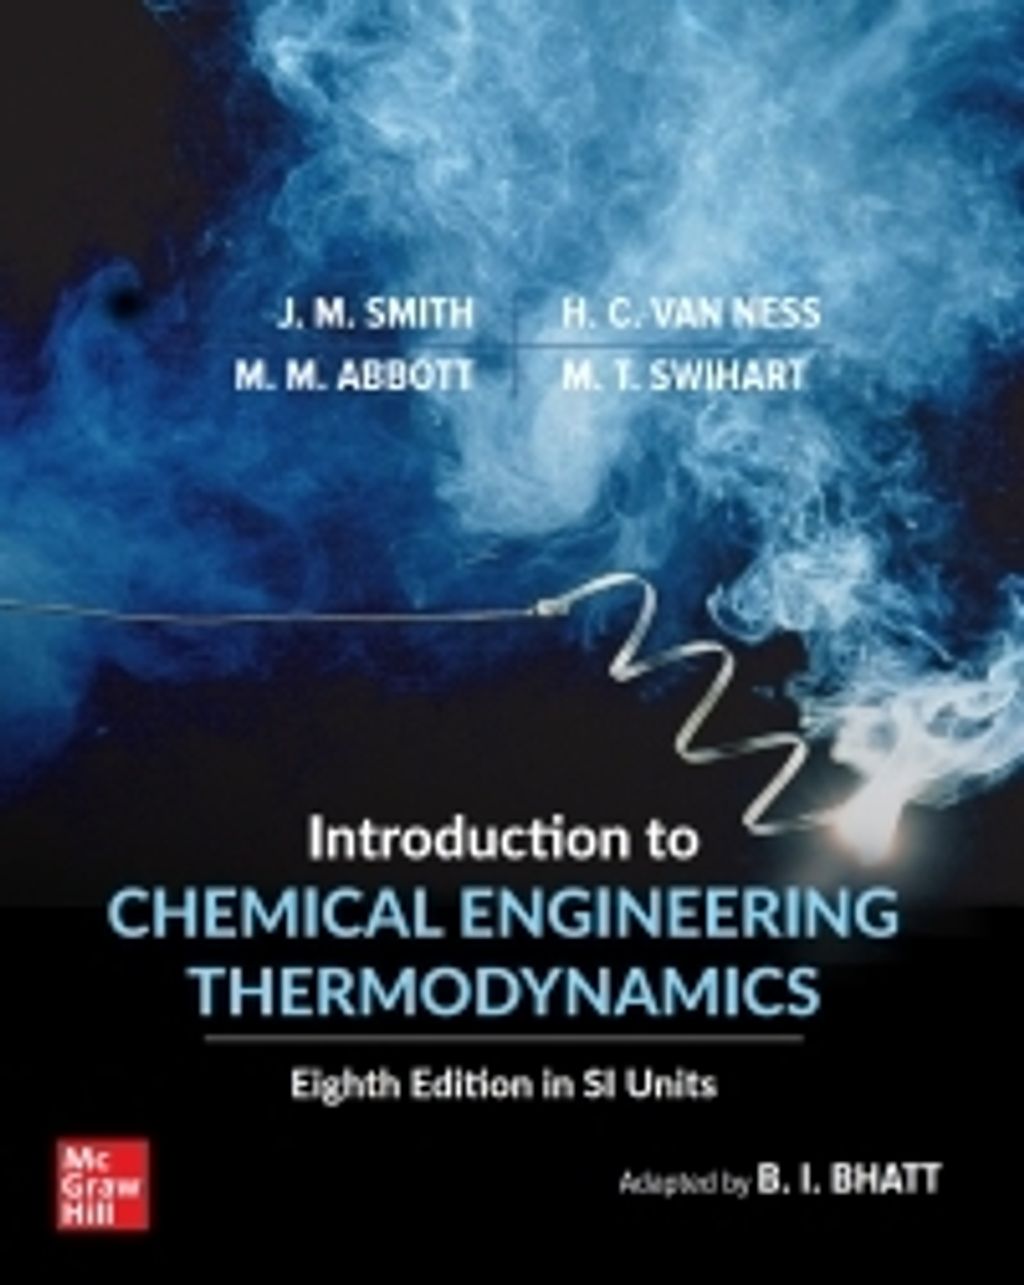 9789813157897 INTRO TO CHEMICAL ENGINEERING THERMODYNAMIC.jpg